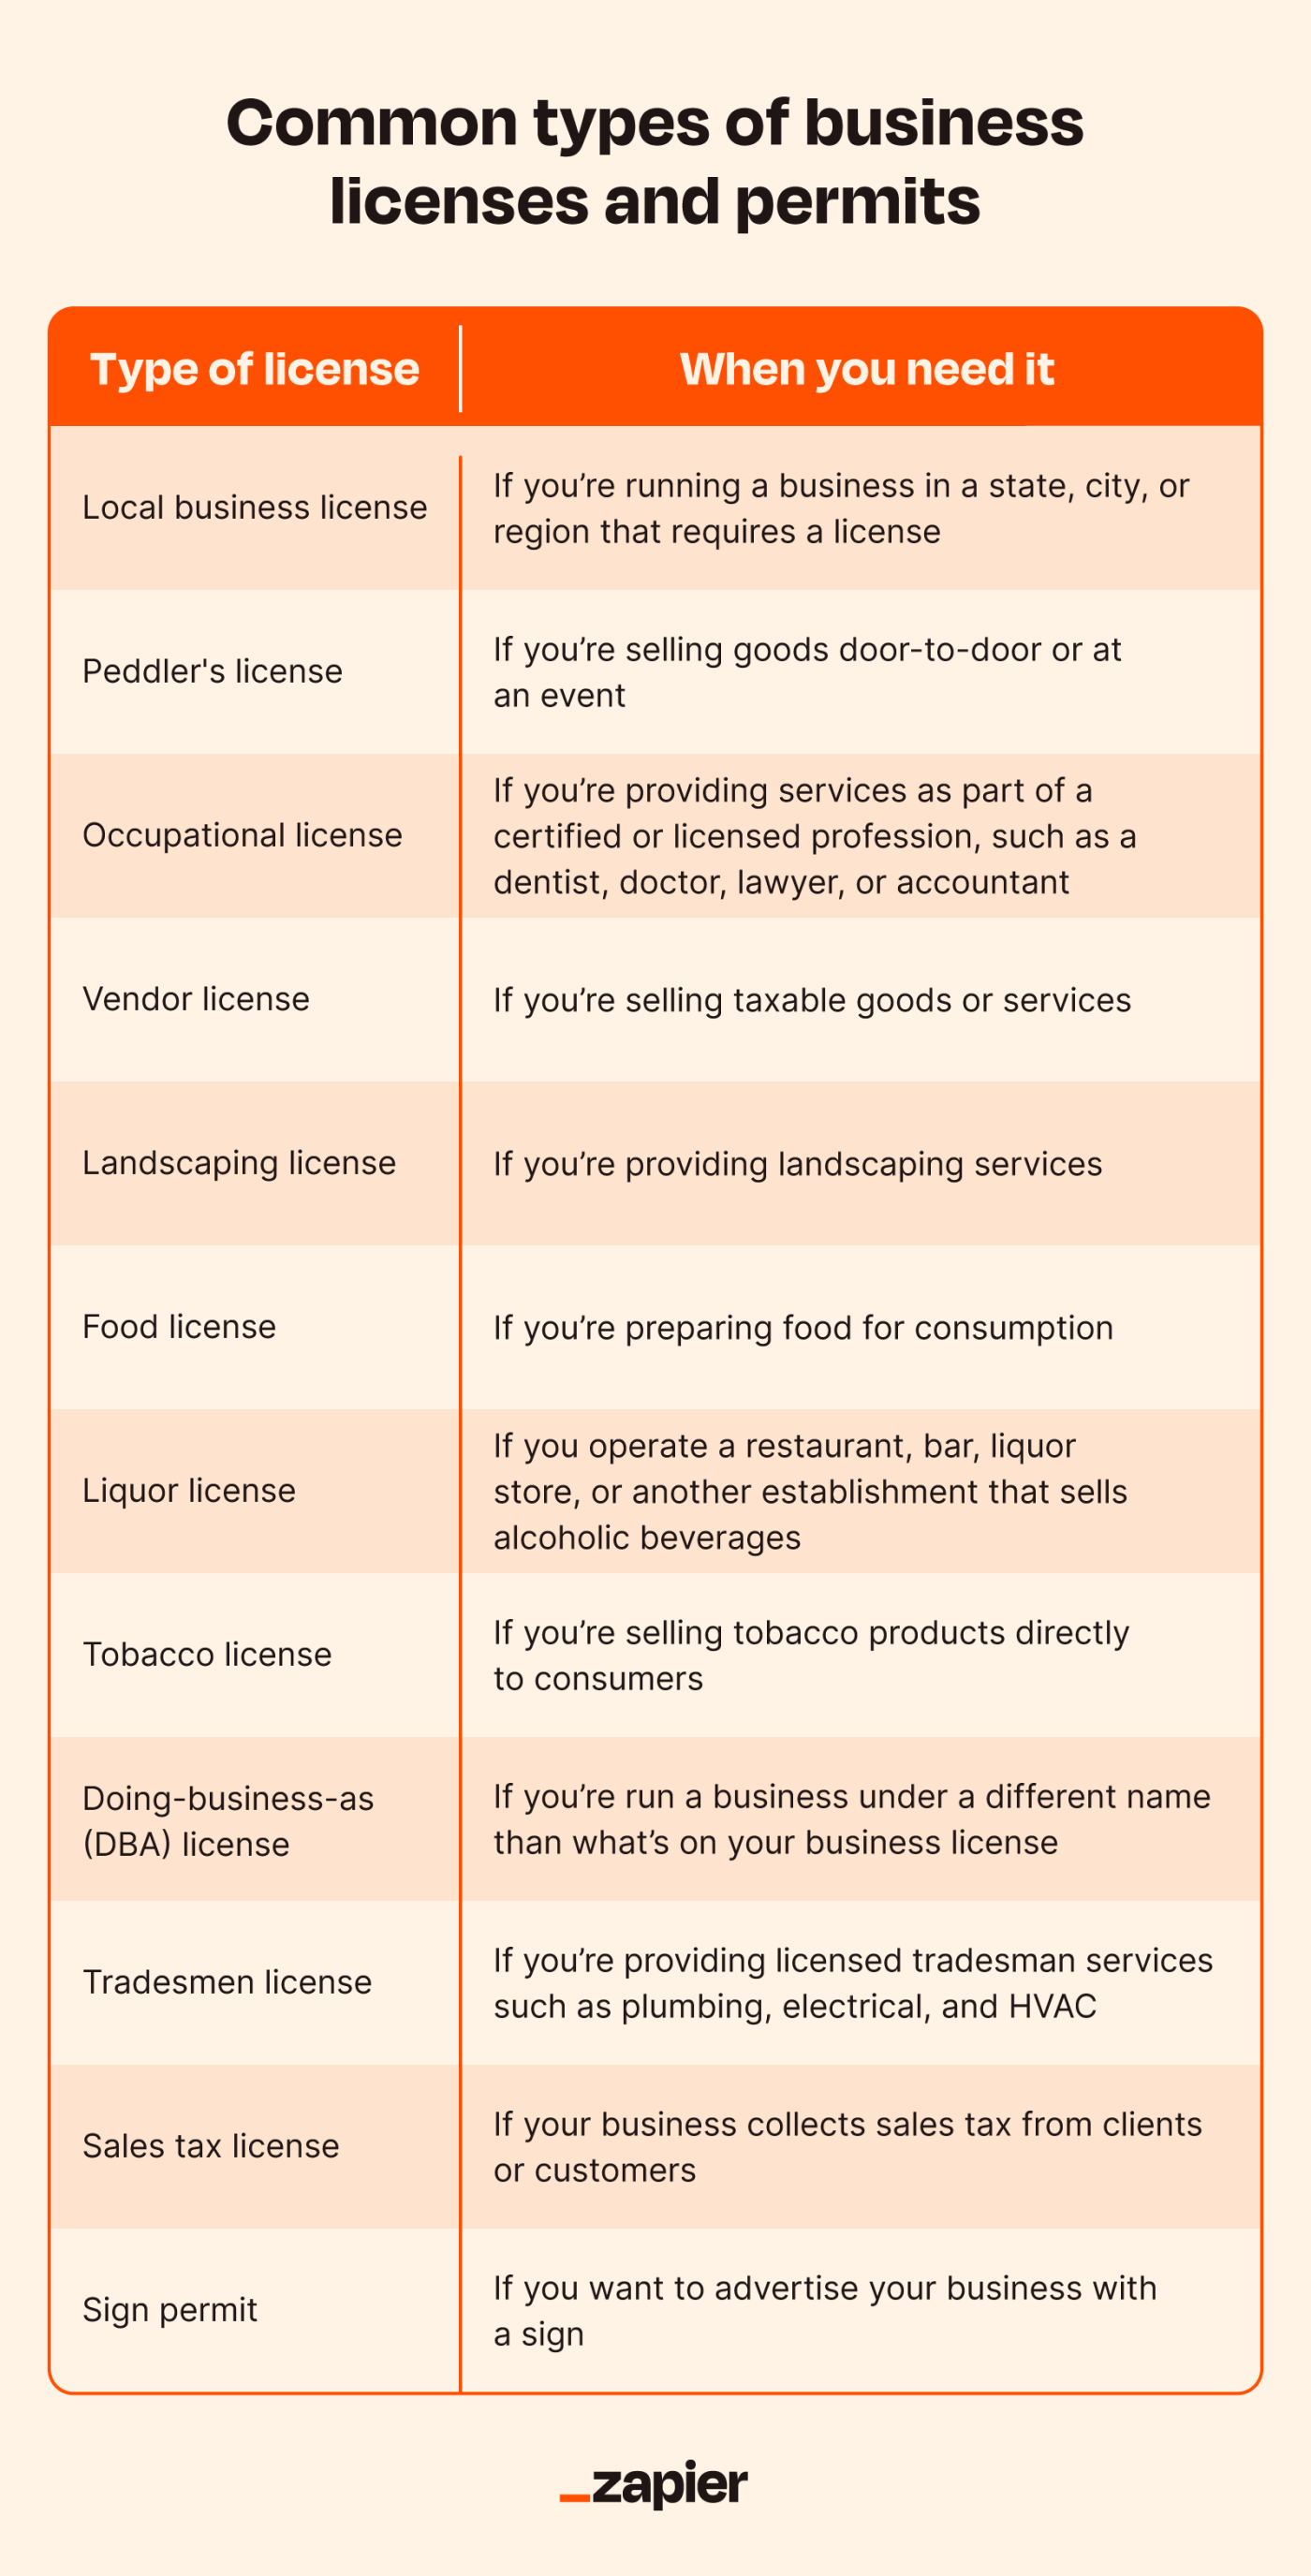 Illustrated table showing the common types of business licenses and permits